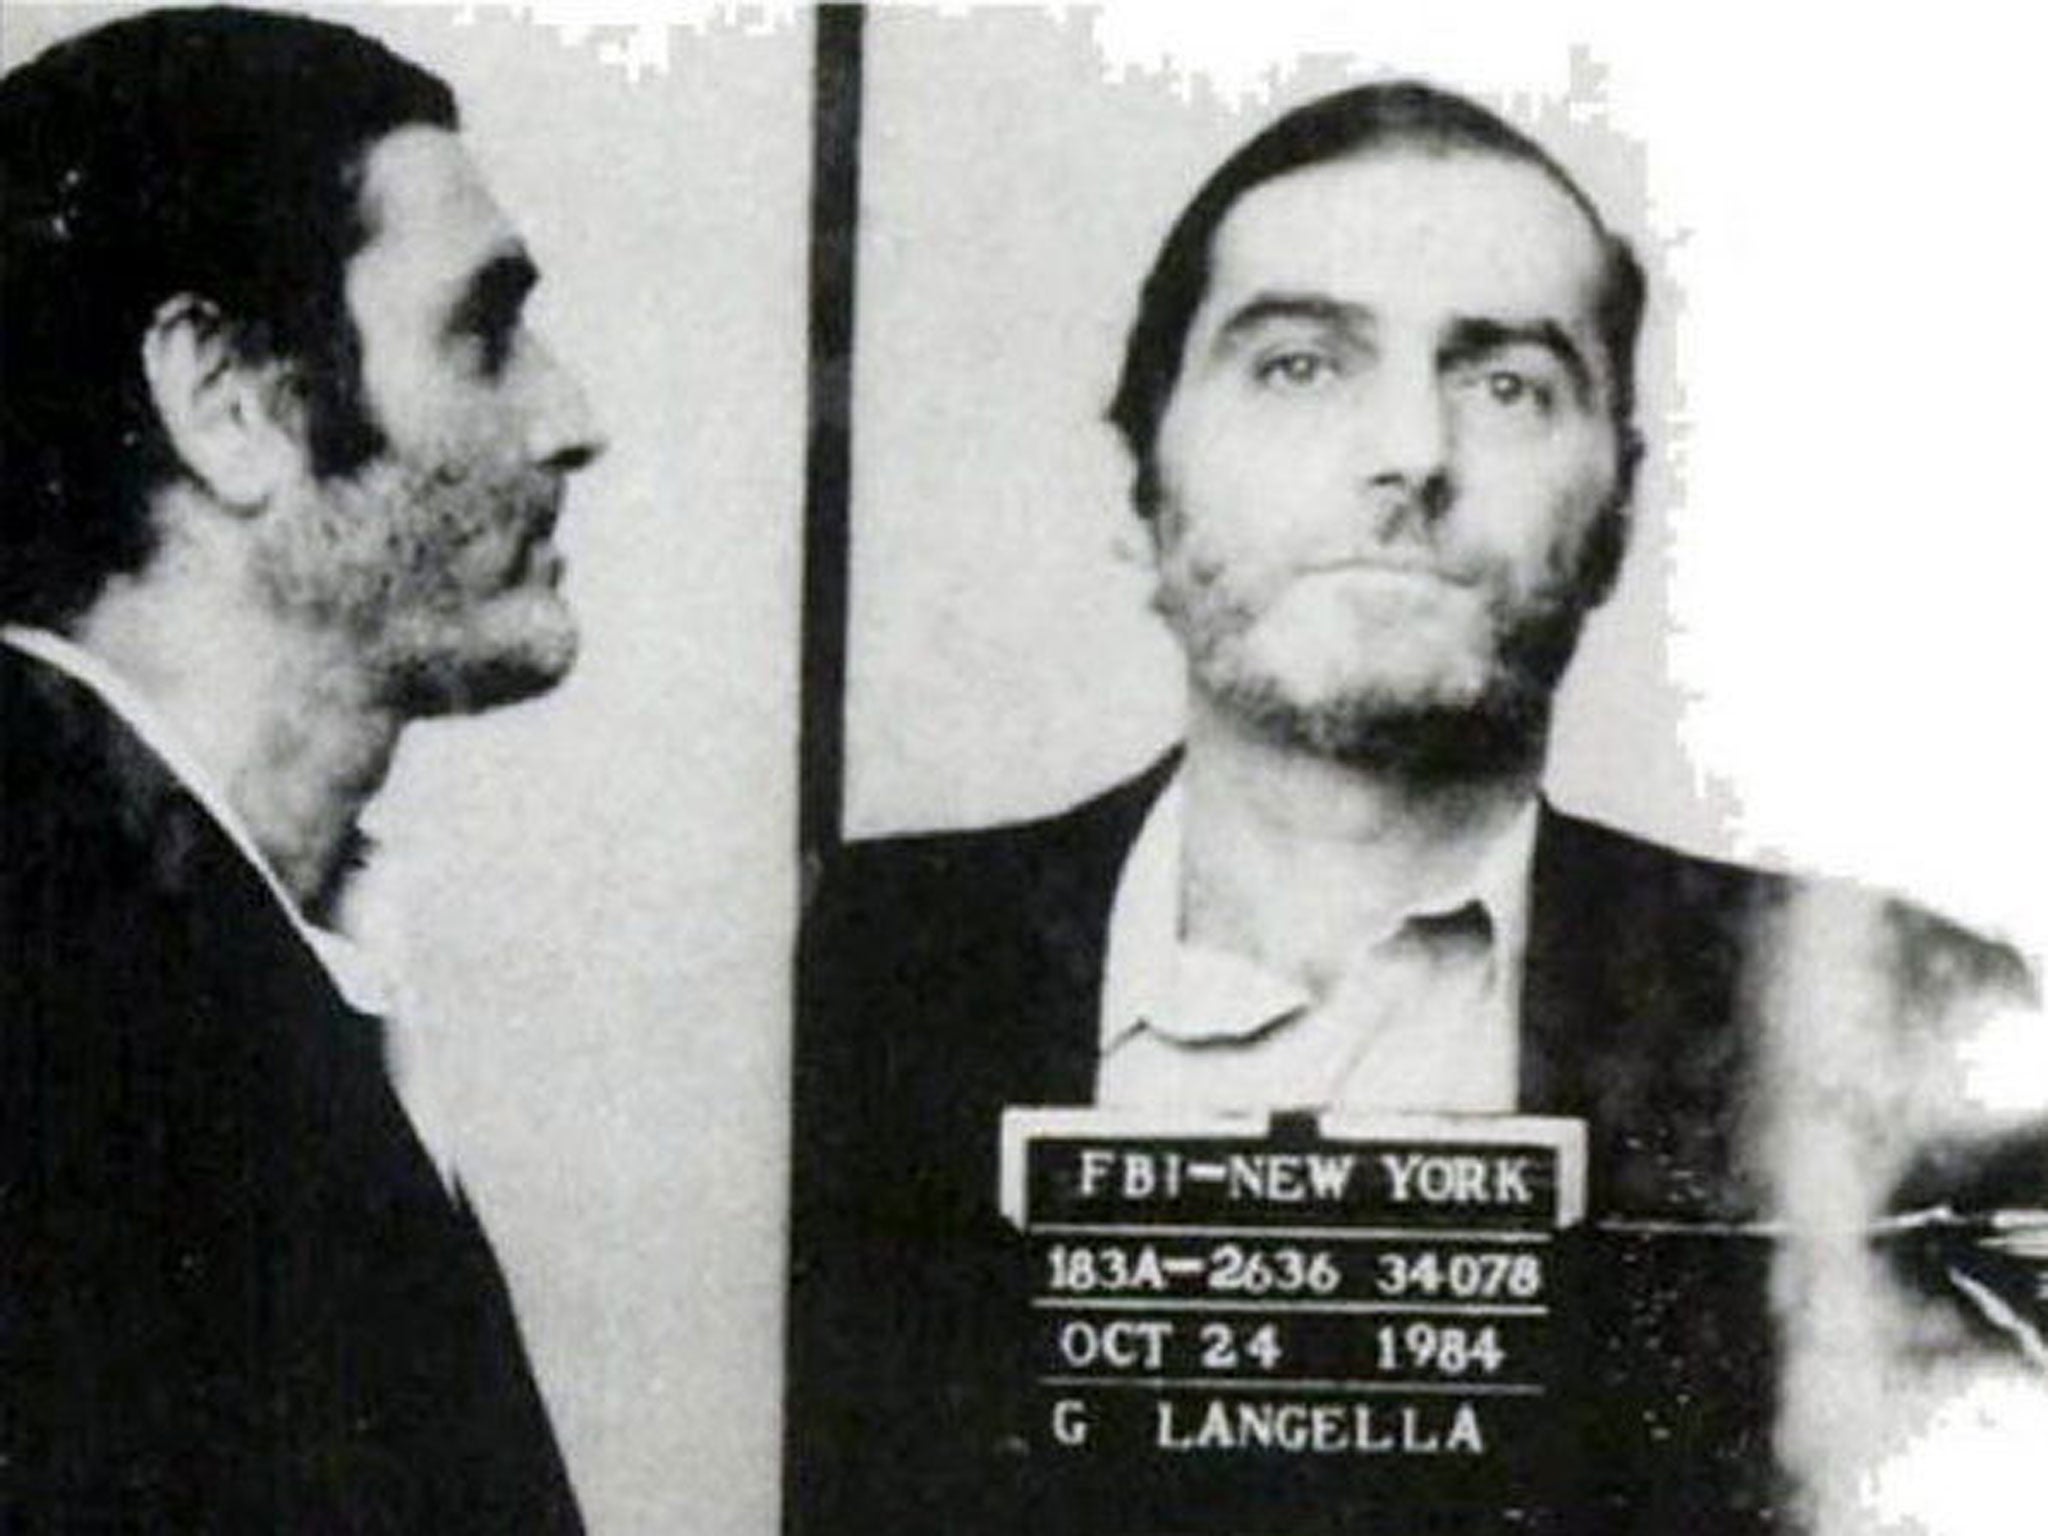 Gennaro Langella, a high-ranking member of the US mafia known as 'Gerry Lang', has died while serving a 100-year prison sentence for racketeering and extortion.